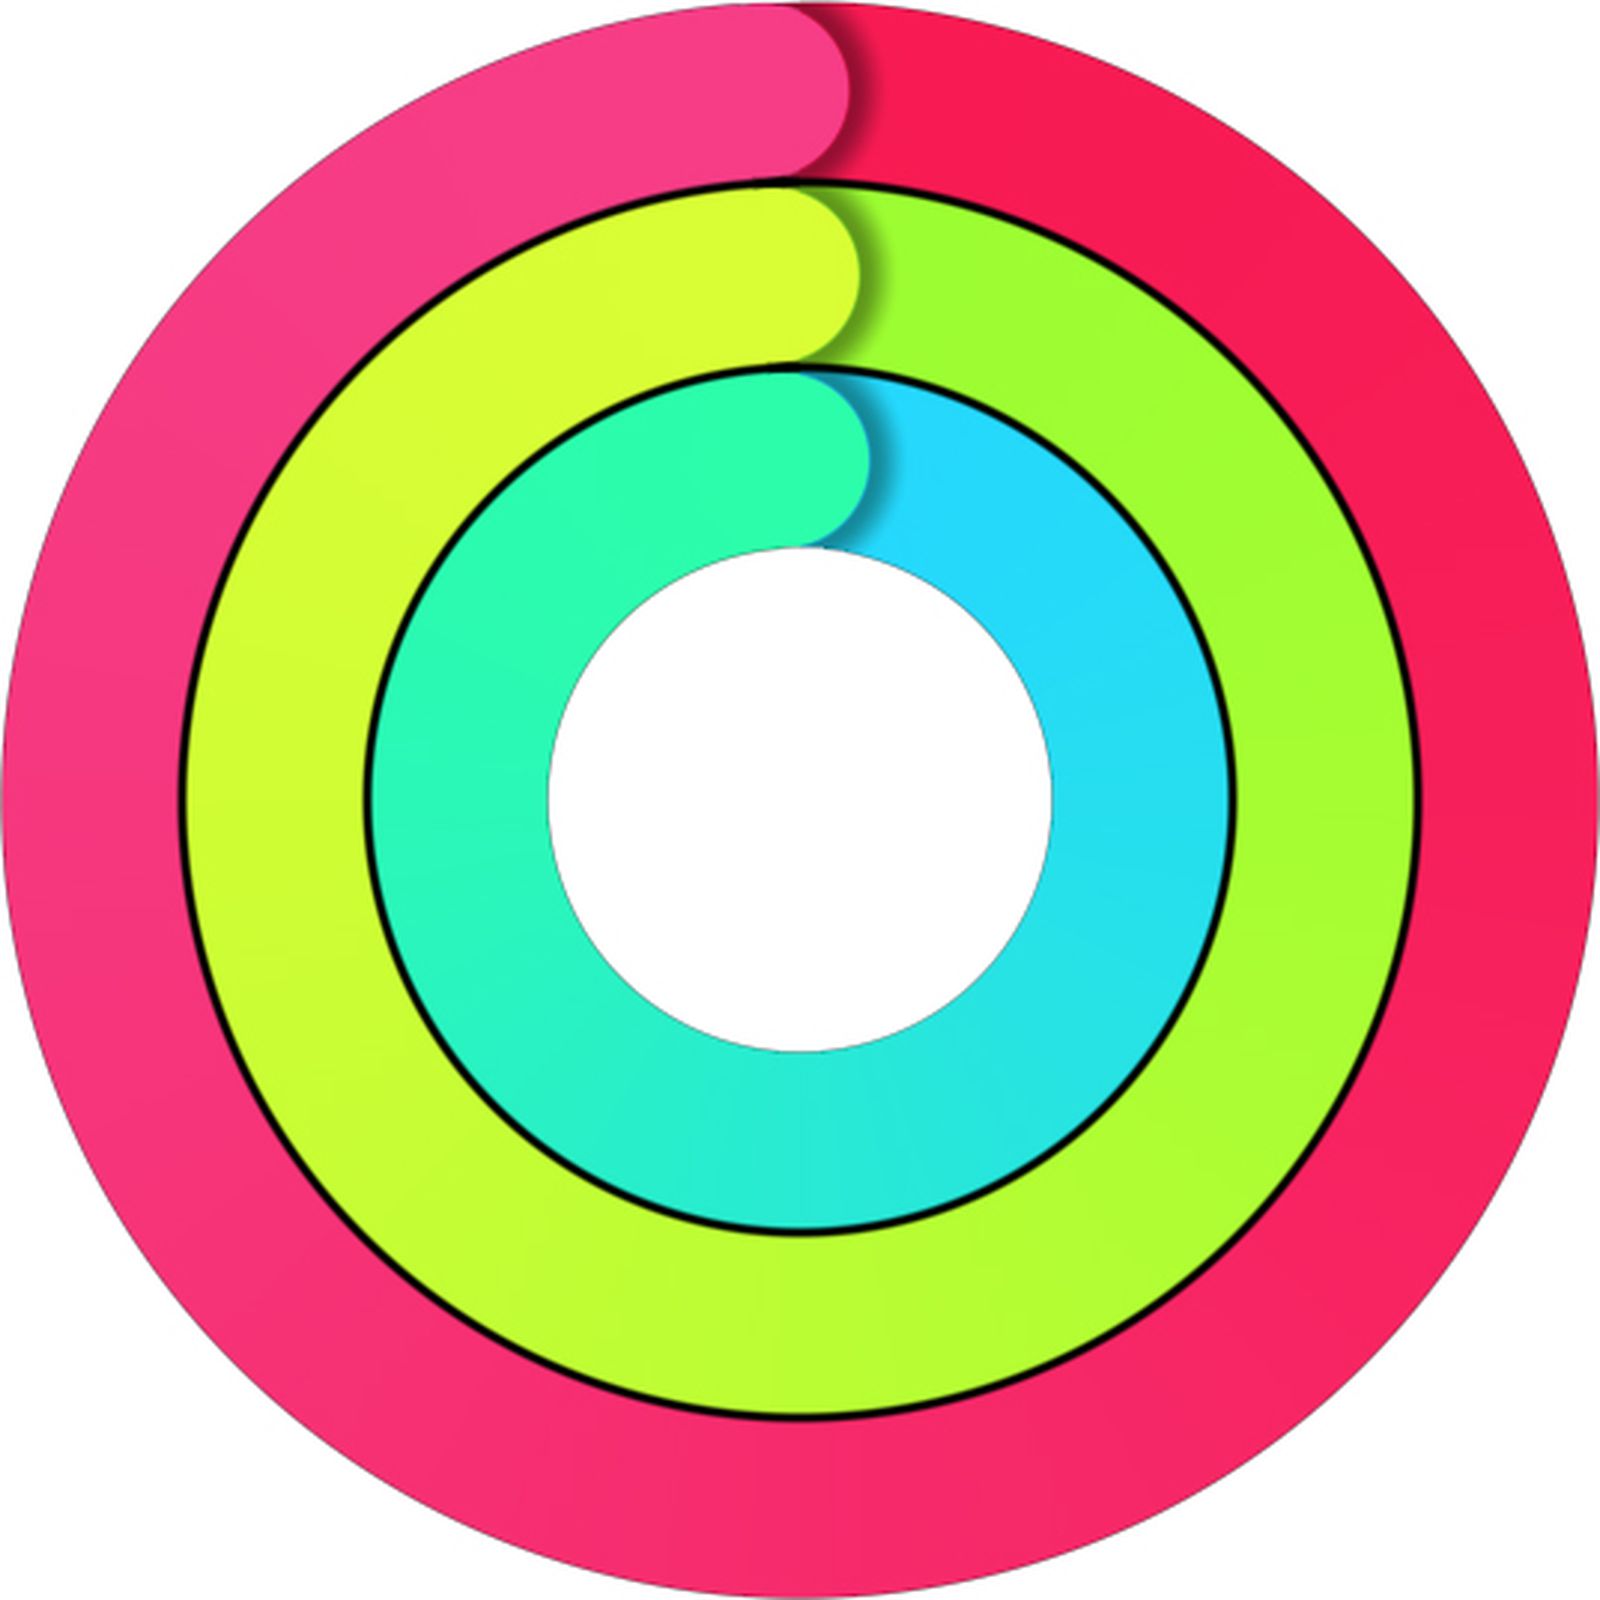 melk wit achterzijde handleiding Apple's Website Promotes 'Closing Your Rings' as Fun Way to Maintain Active  Lifestyle With Apple Watch - MacRumors